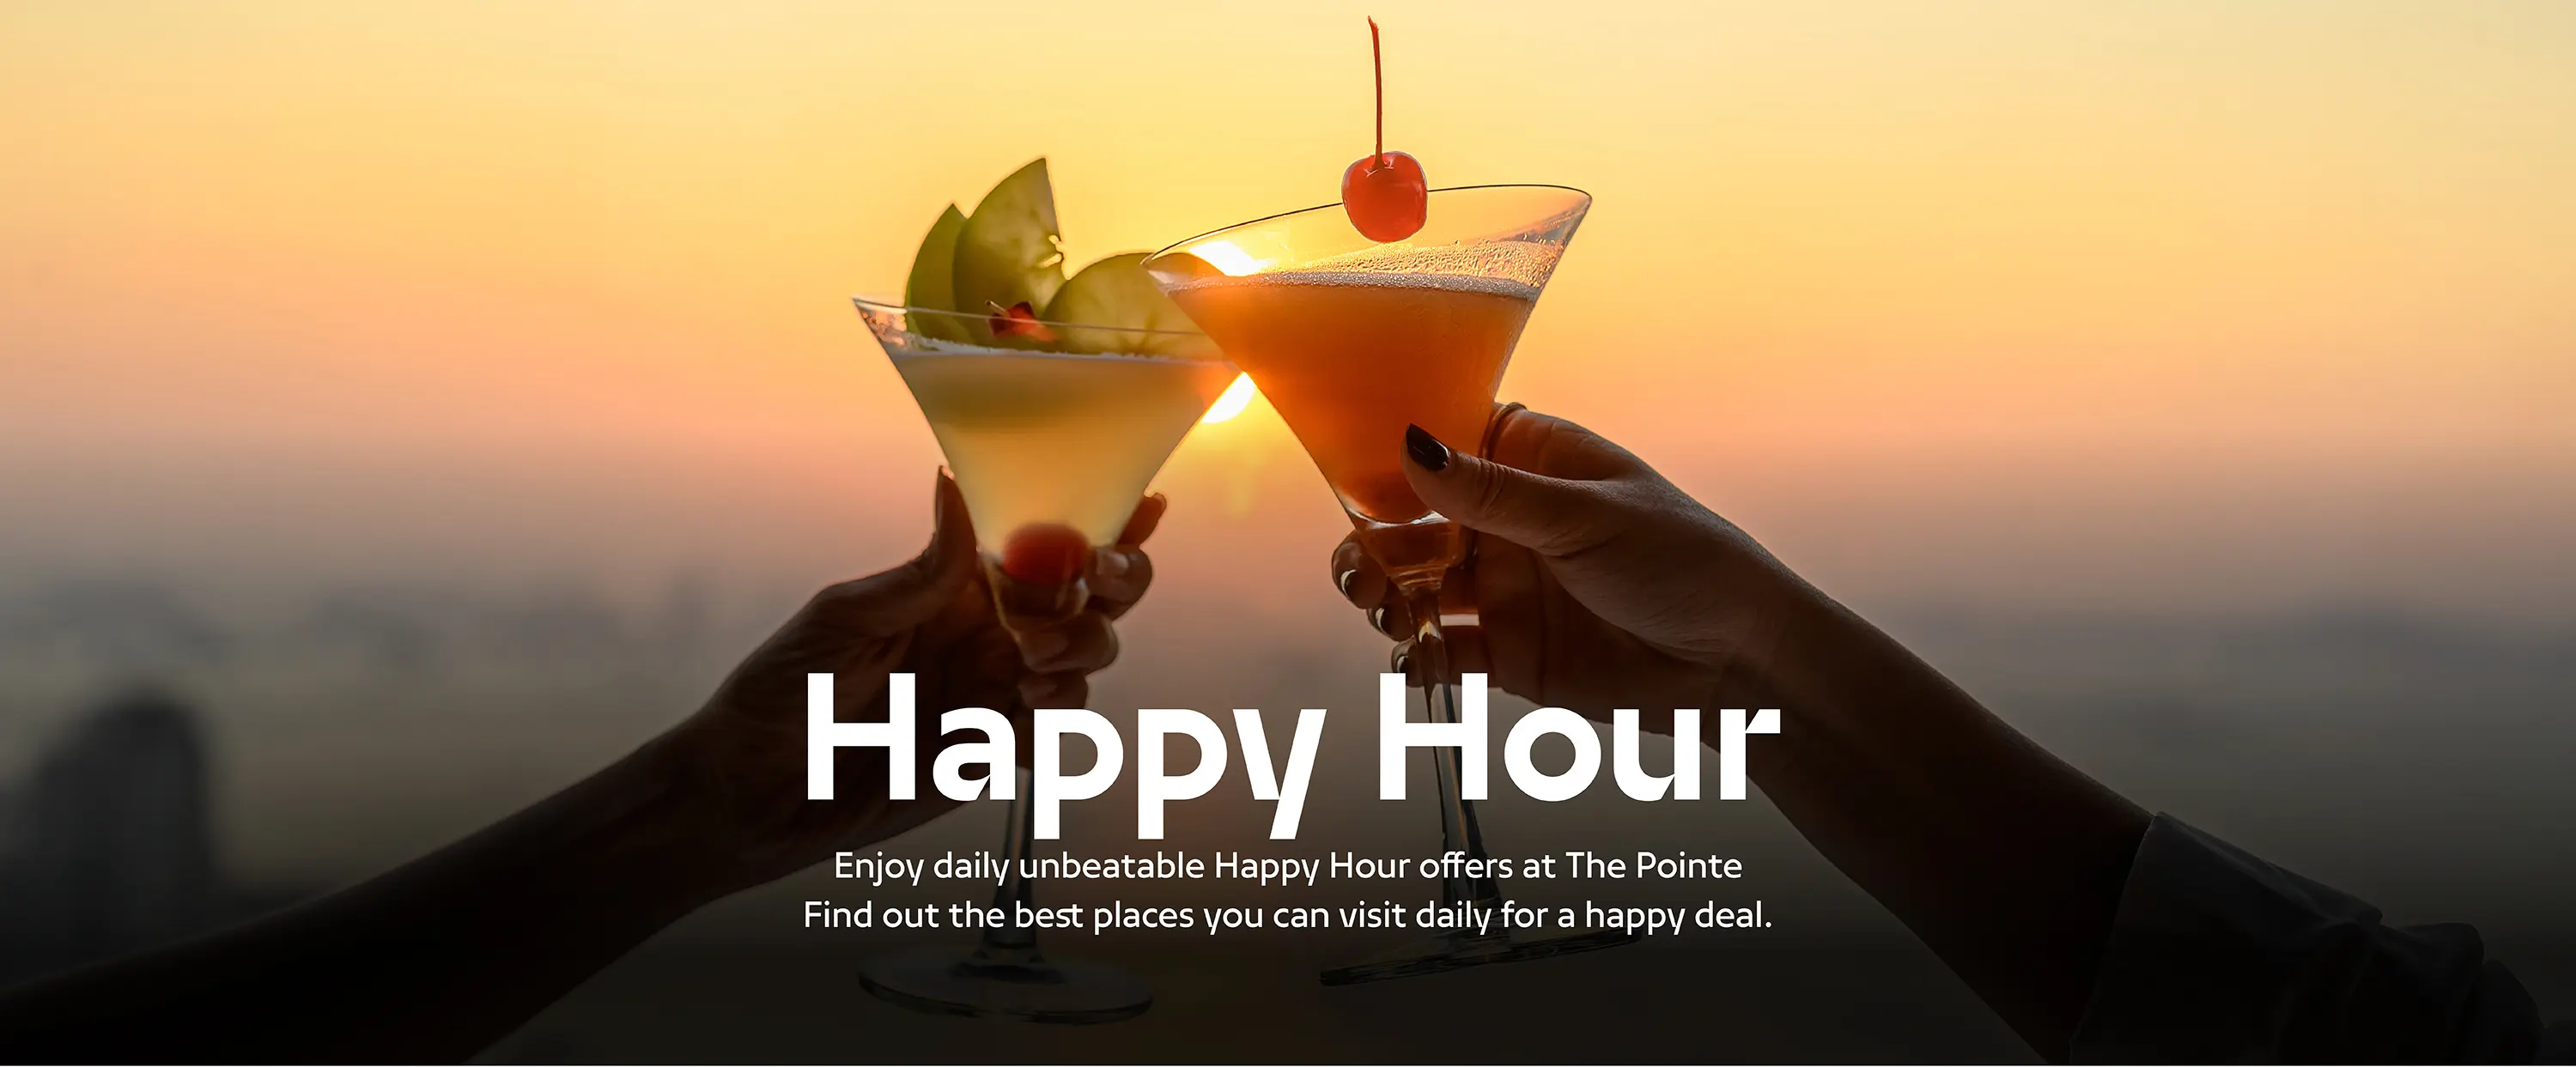 Restaurants and Cafes Happy Hour Deals